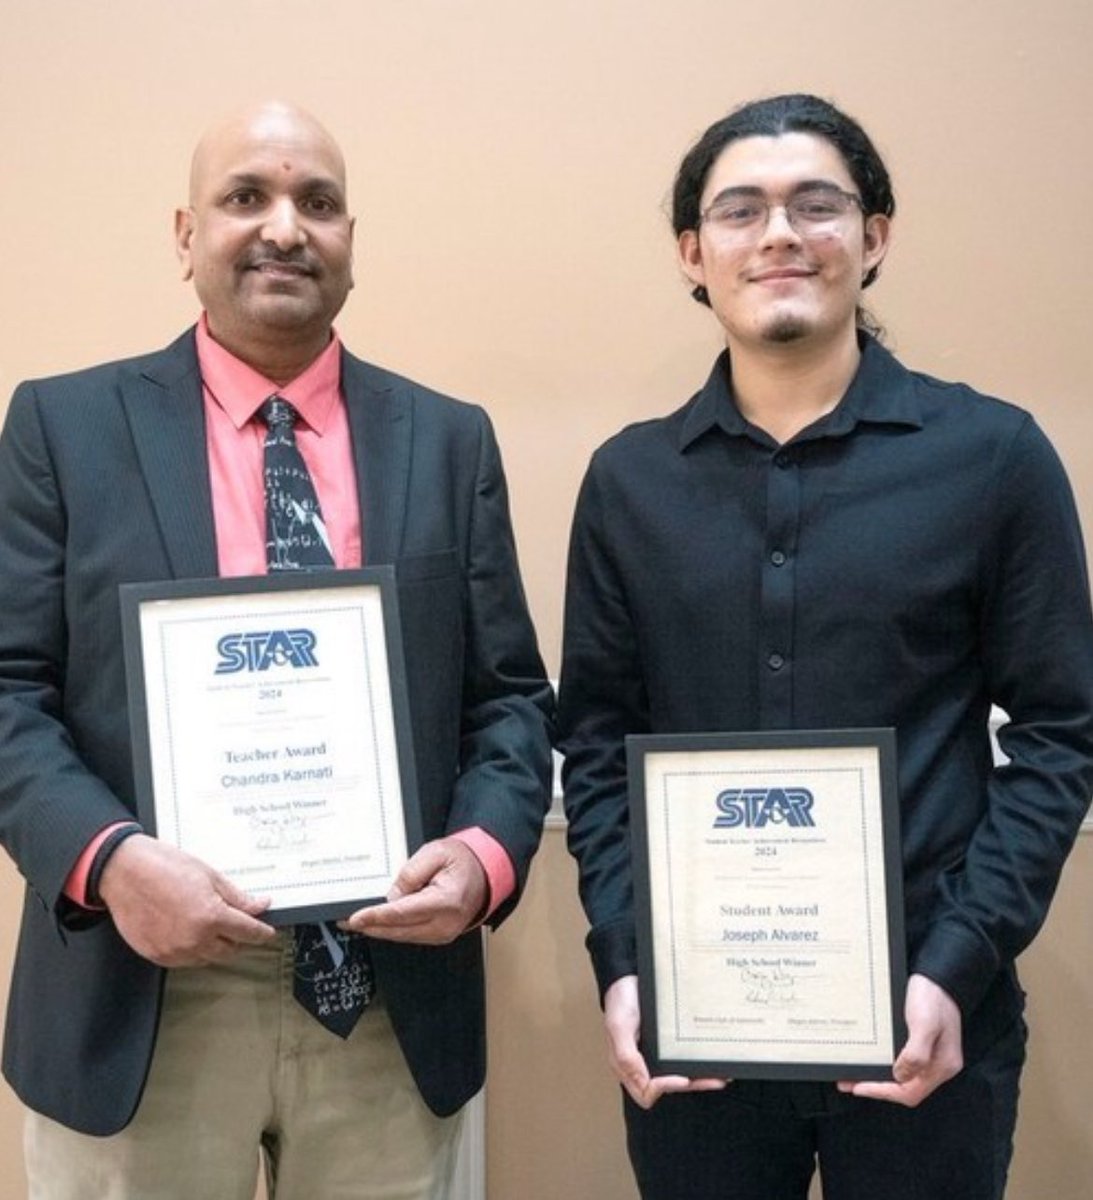 What a joy to see Joseph Alvarez and Chandra Karnati on their much deserved recognition as STAR student and STAR teacher for the City of Gainesville. Joseph will attend @MIT in the fall. His story is truly inspiring! #GoBigRed